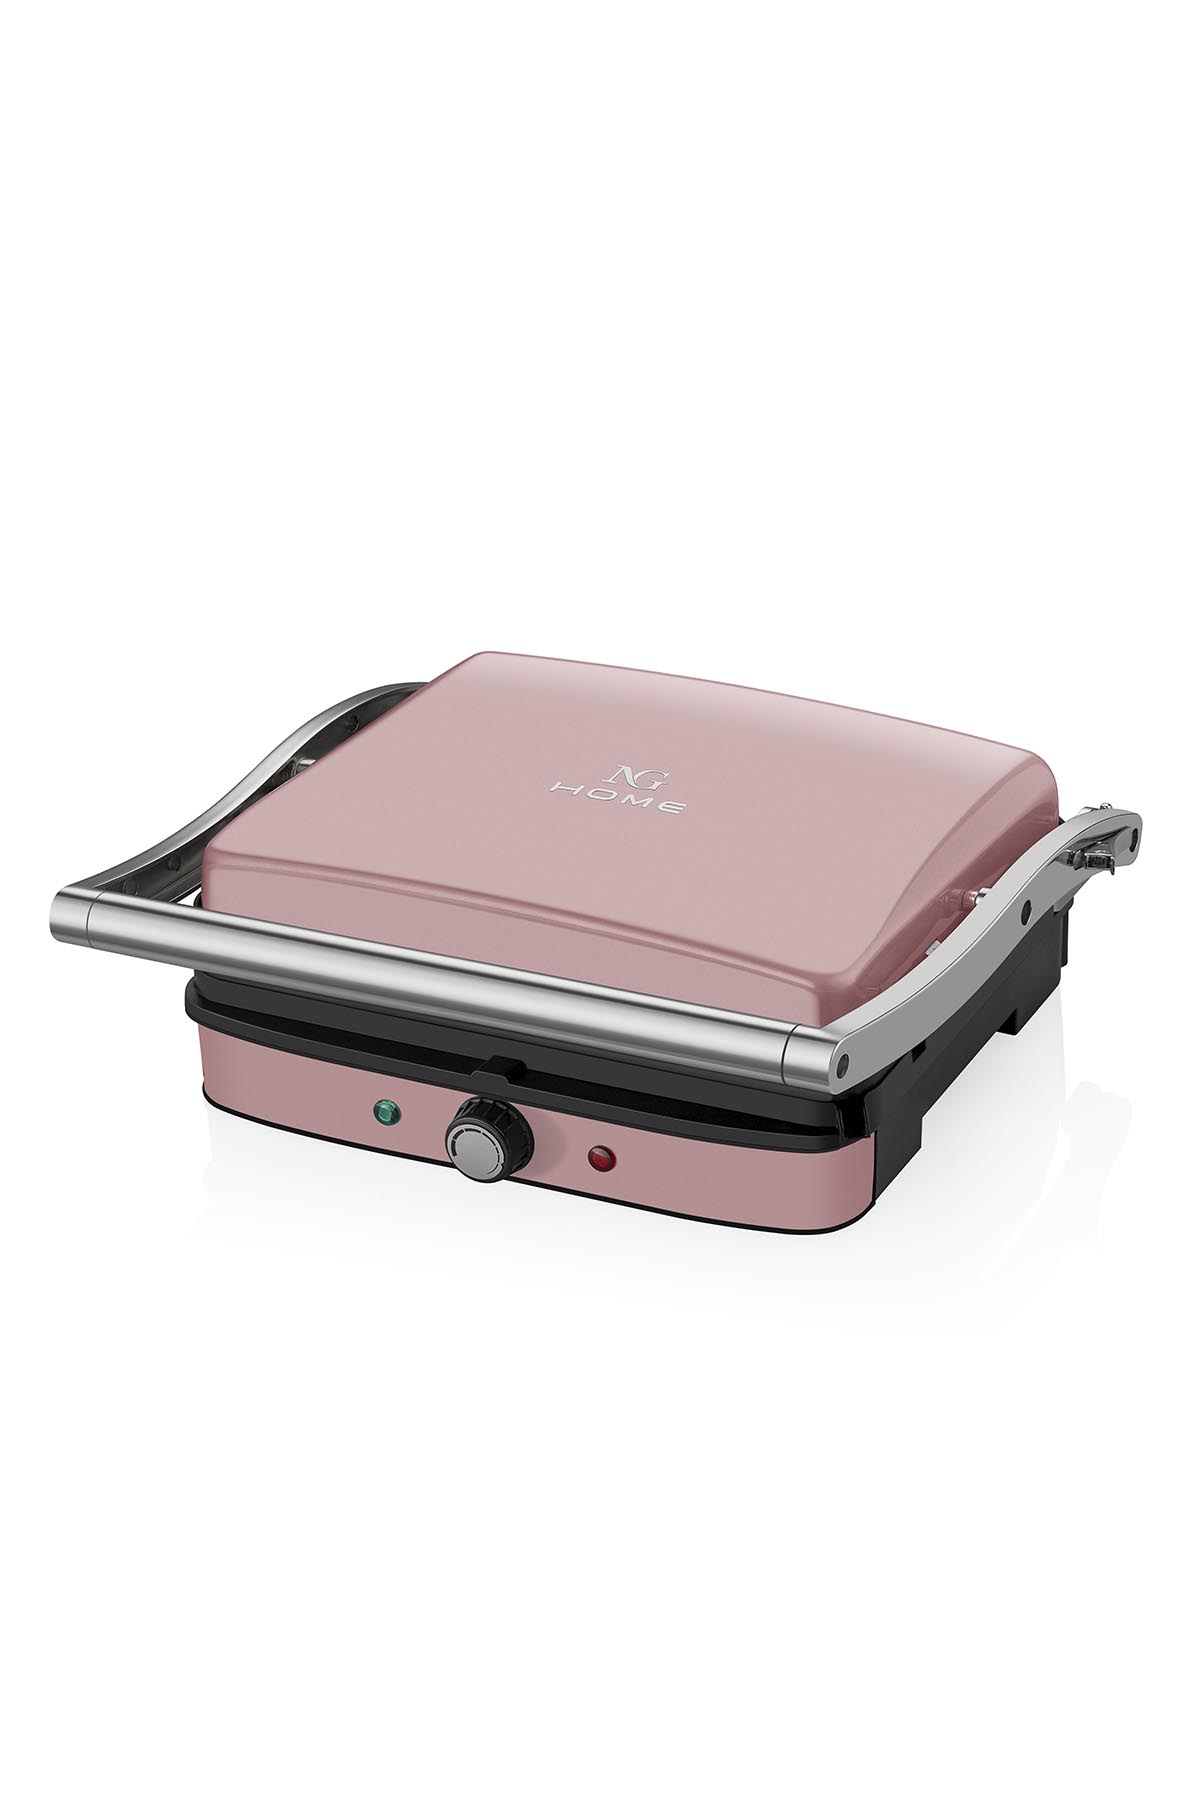 NG HOME RETRO PLUS TOST MAKİNESİ ROSE